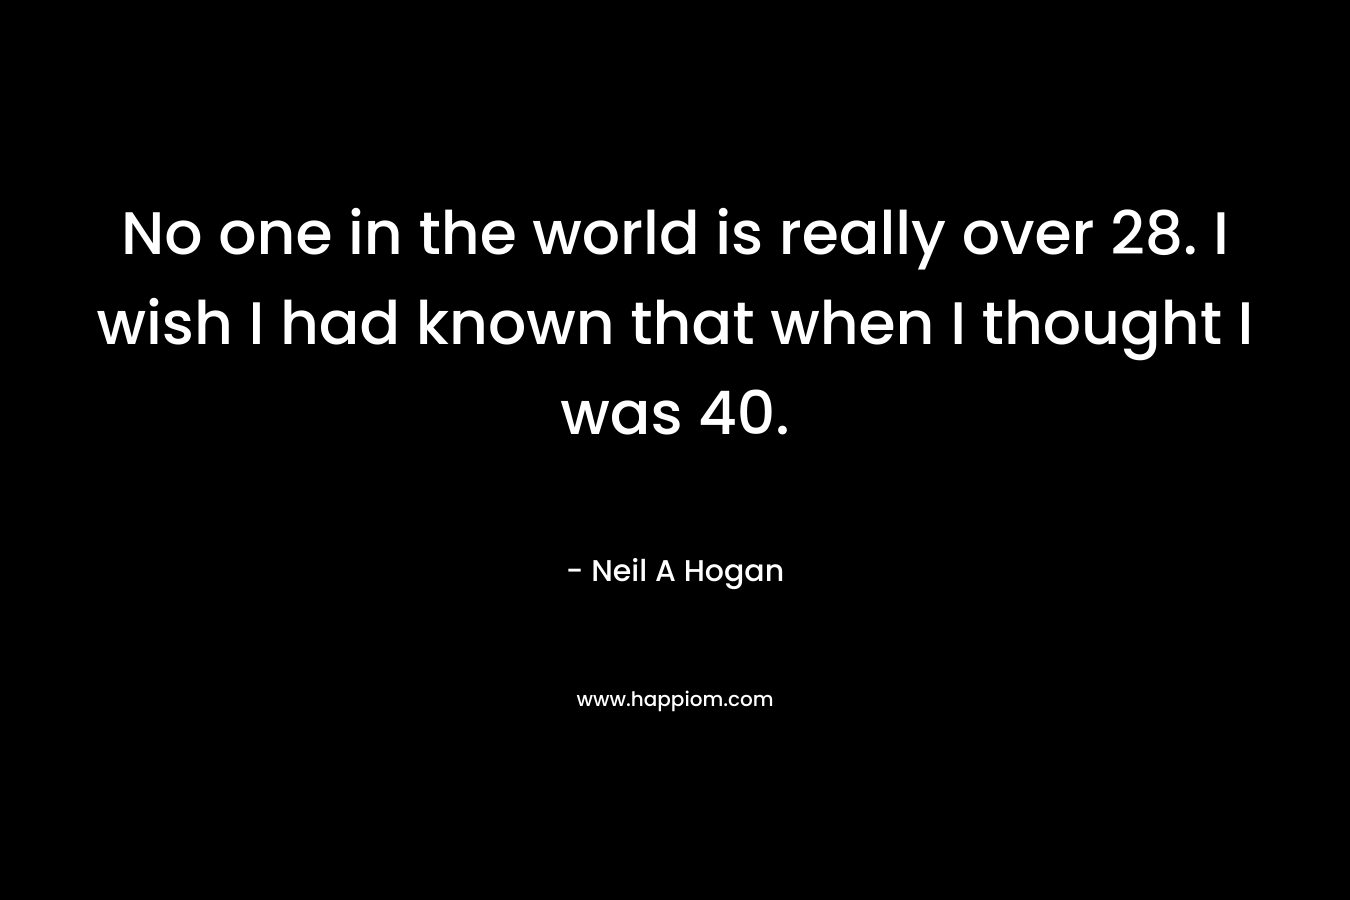 No one in the world is really over 28. I wish I had known that when I thought I was 40. – Neil A Hogan